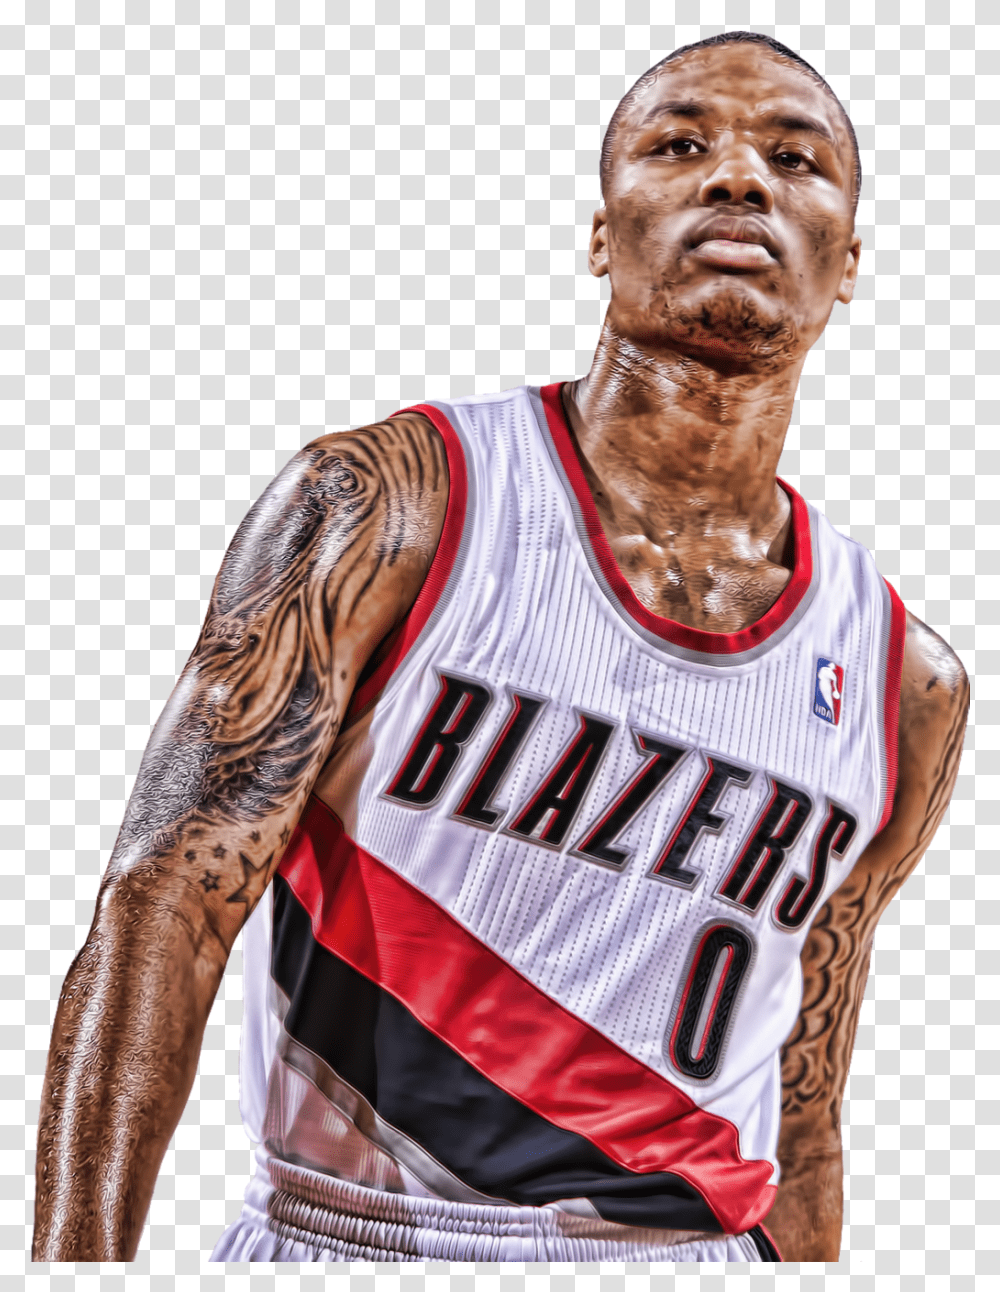 Cool D Hd Basketball Free Portland Trail Blazers, Skin, Person, Clothing, People Transparent Png